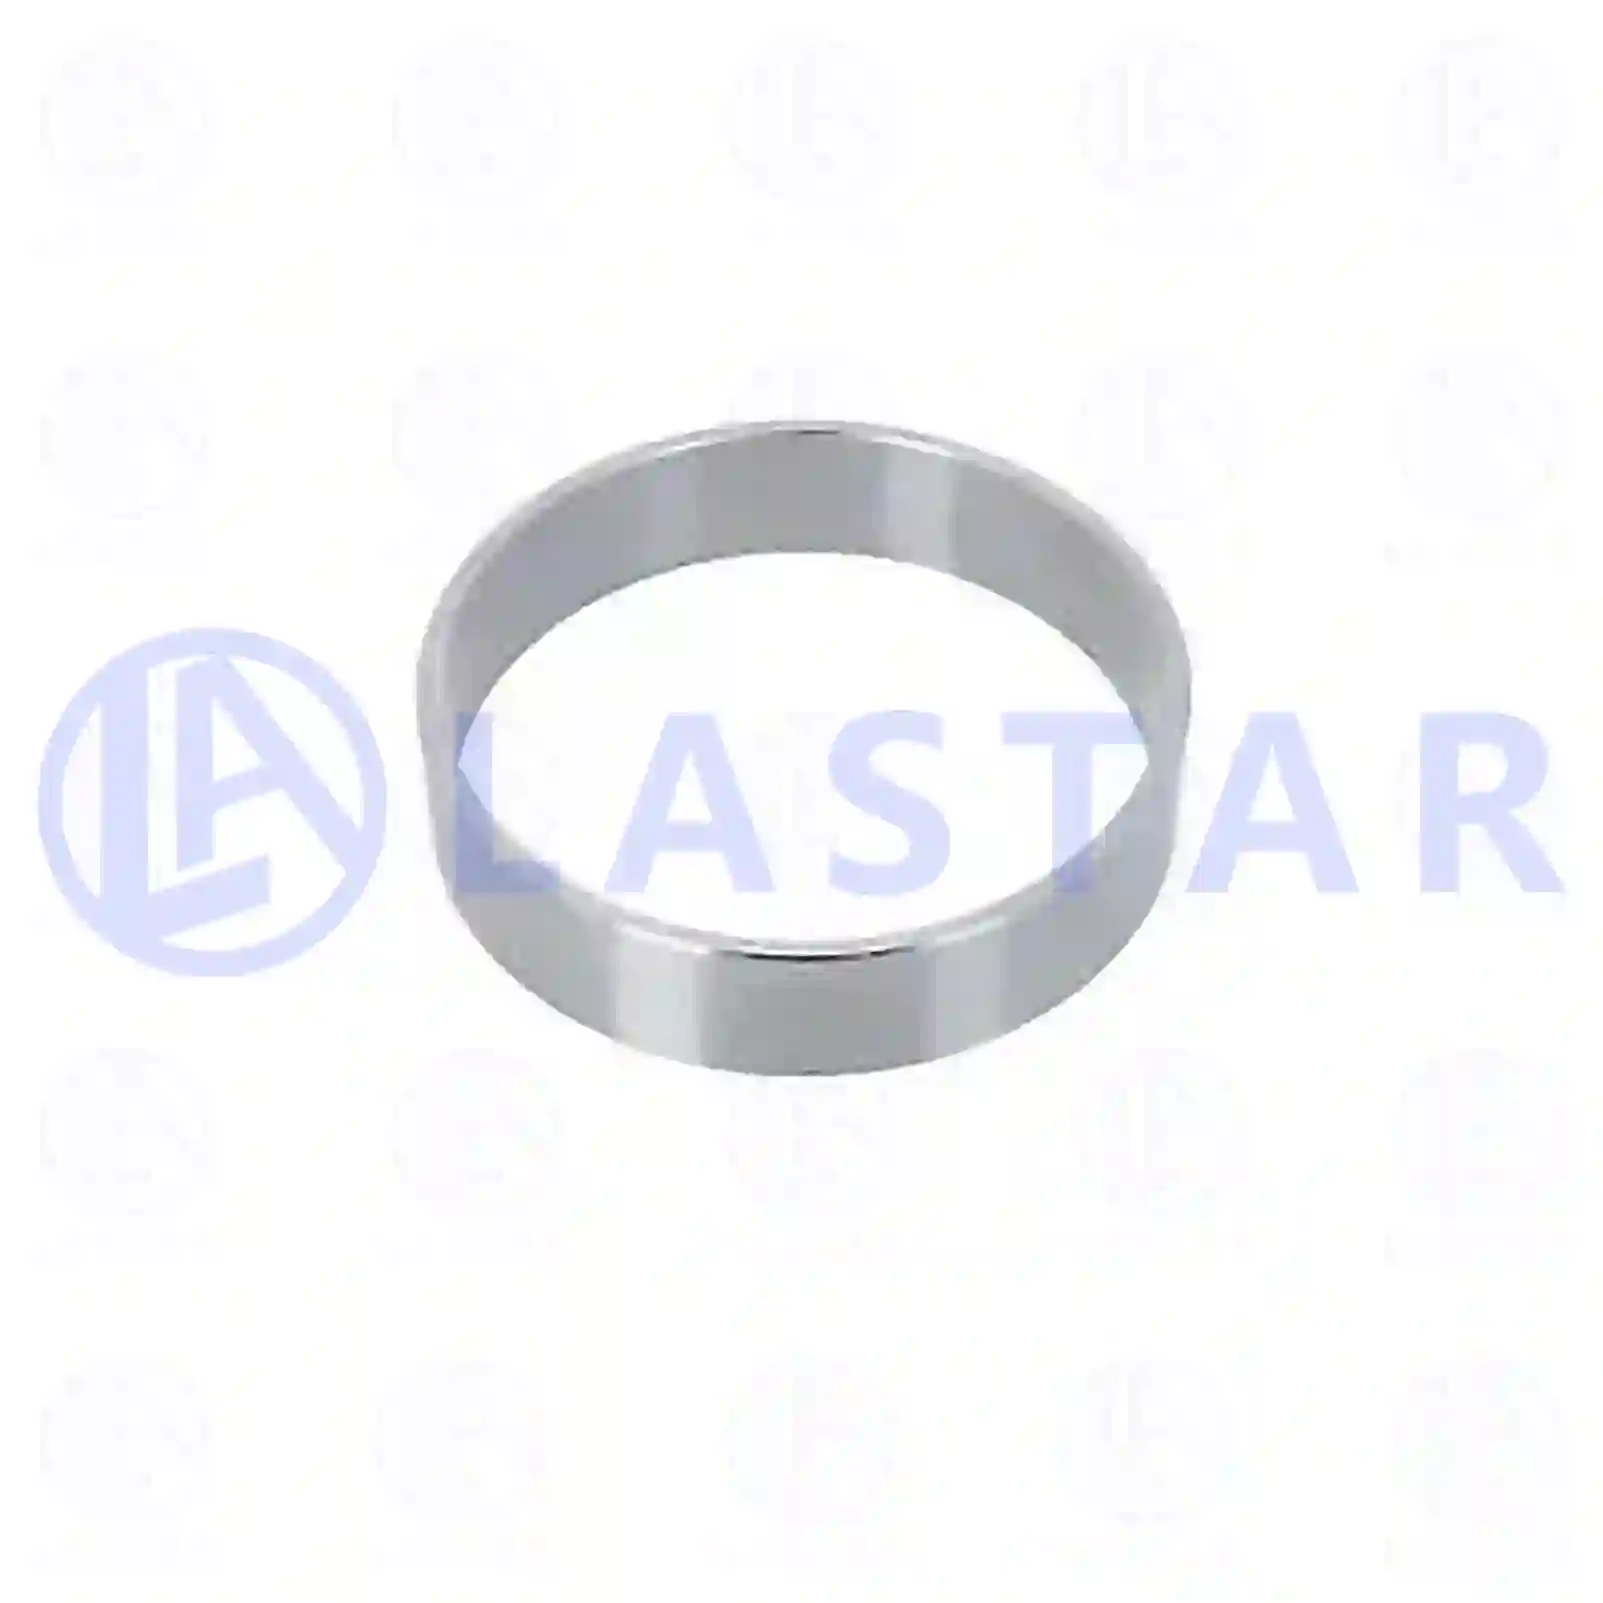 Spacer ring, 77726675, 7181864 ||  77726675 Lastar Spare Part | Truck Spare Parts, Auotomotive Spare Parts Spacer ring, 77726675, 7181864 ||  77726675 Lastar Spare Part | Truck Spare Parts, Auotomotive Spare Parts